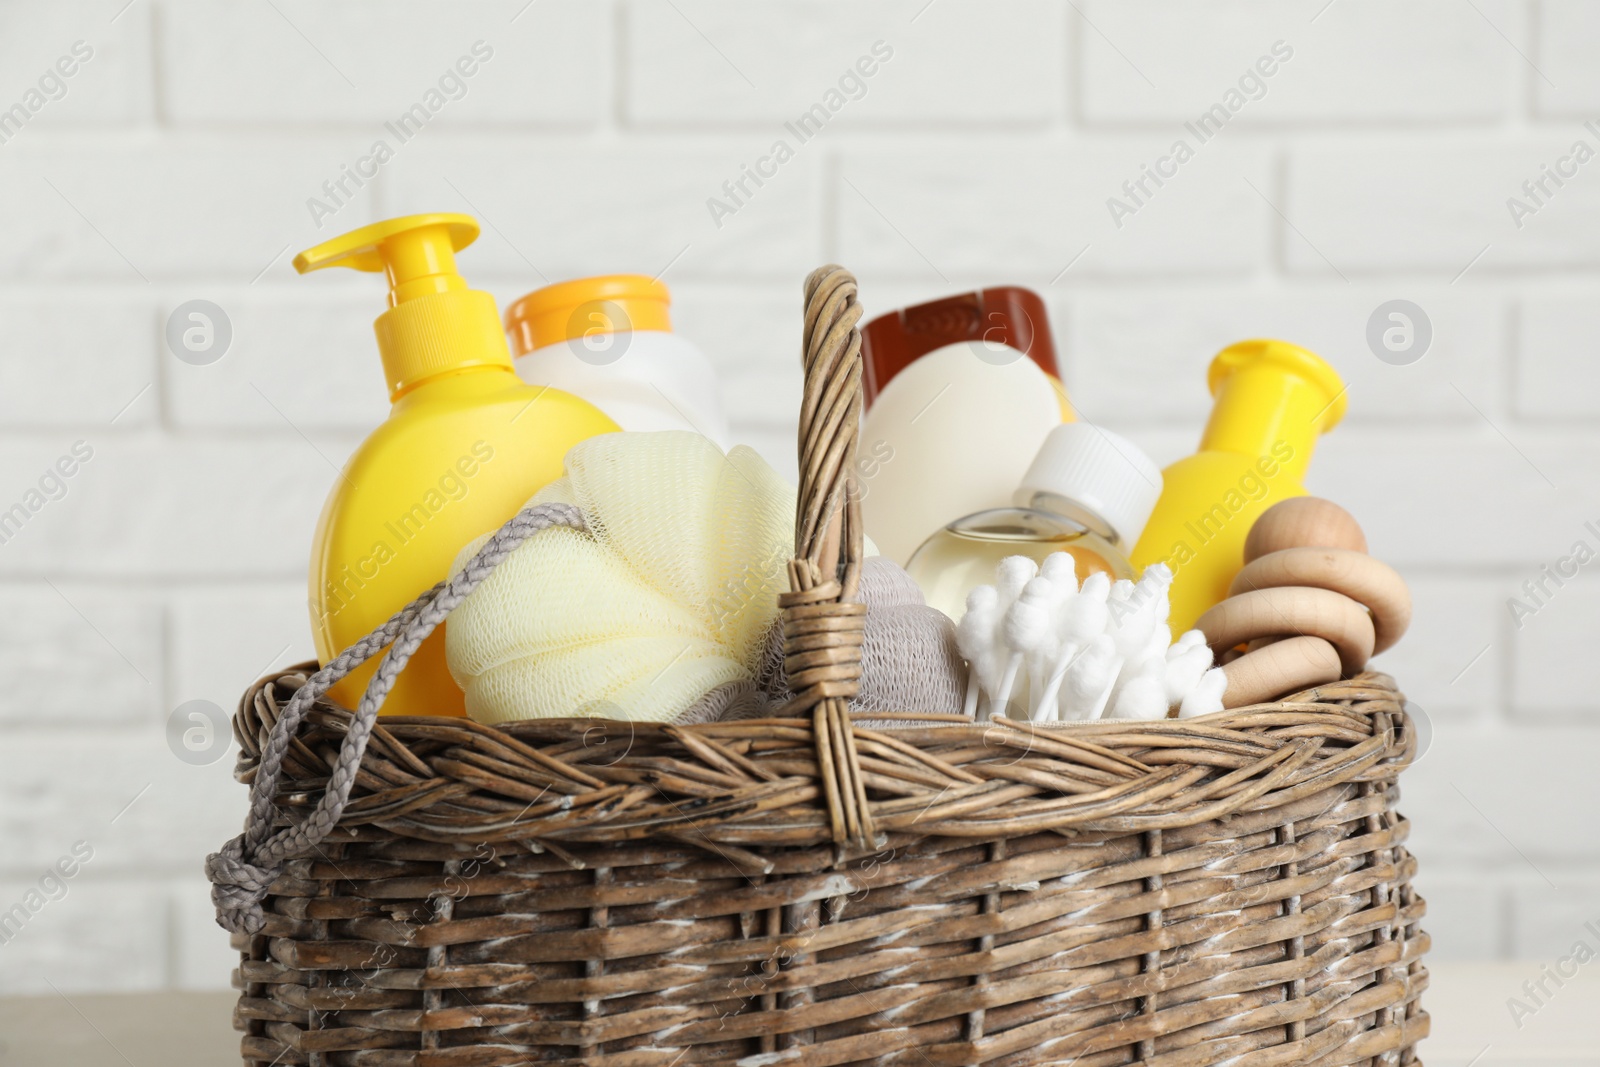 Photo of Wicker basket full of different baby cosmetic products, accessories and toy against white brick wall, closeup